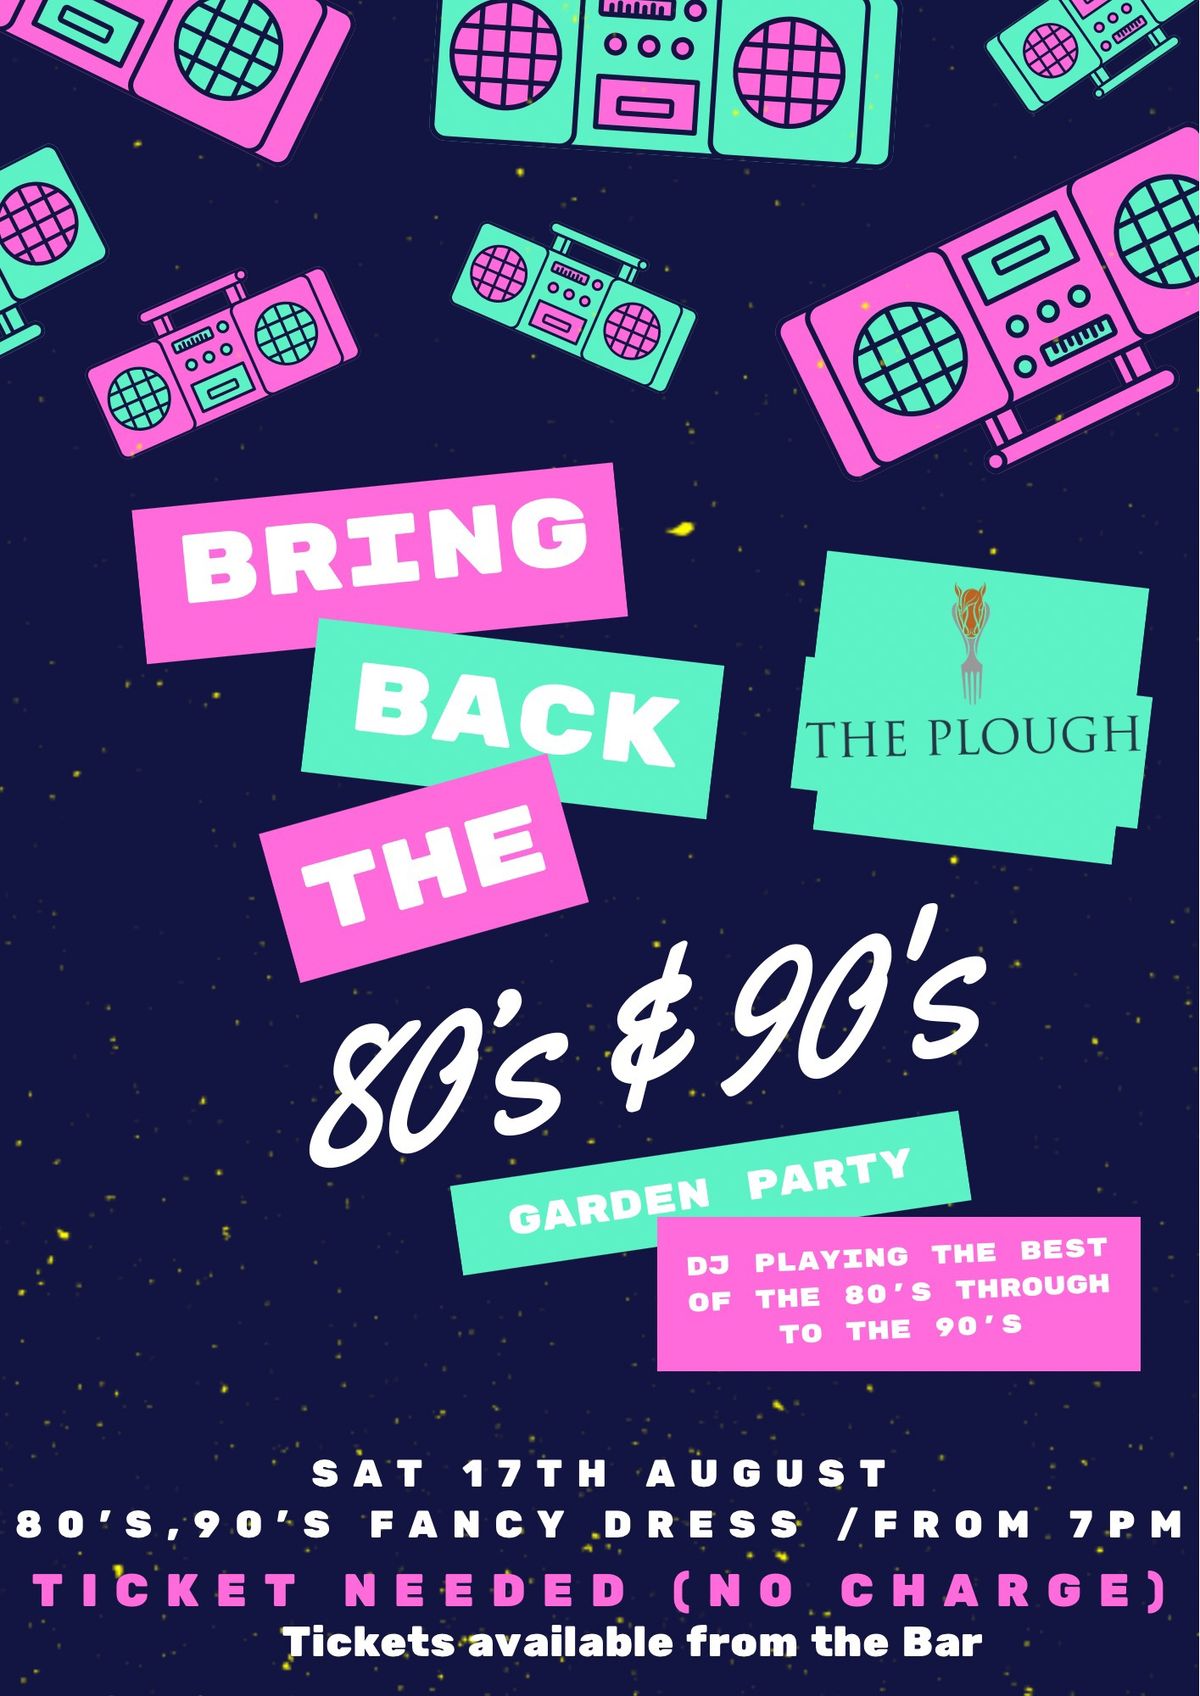 Bring Back The 80s & 90s Garden Party \ud83c\udf88